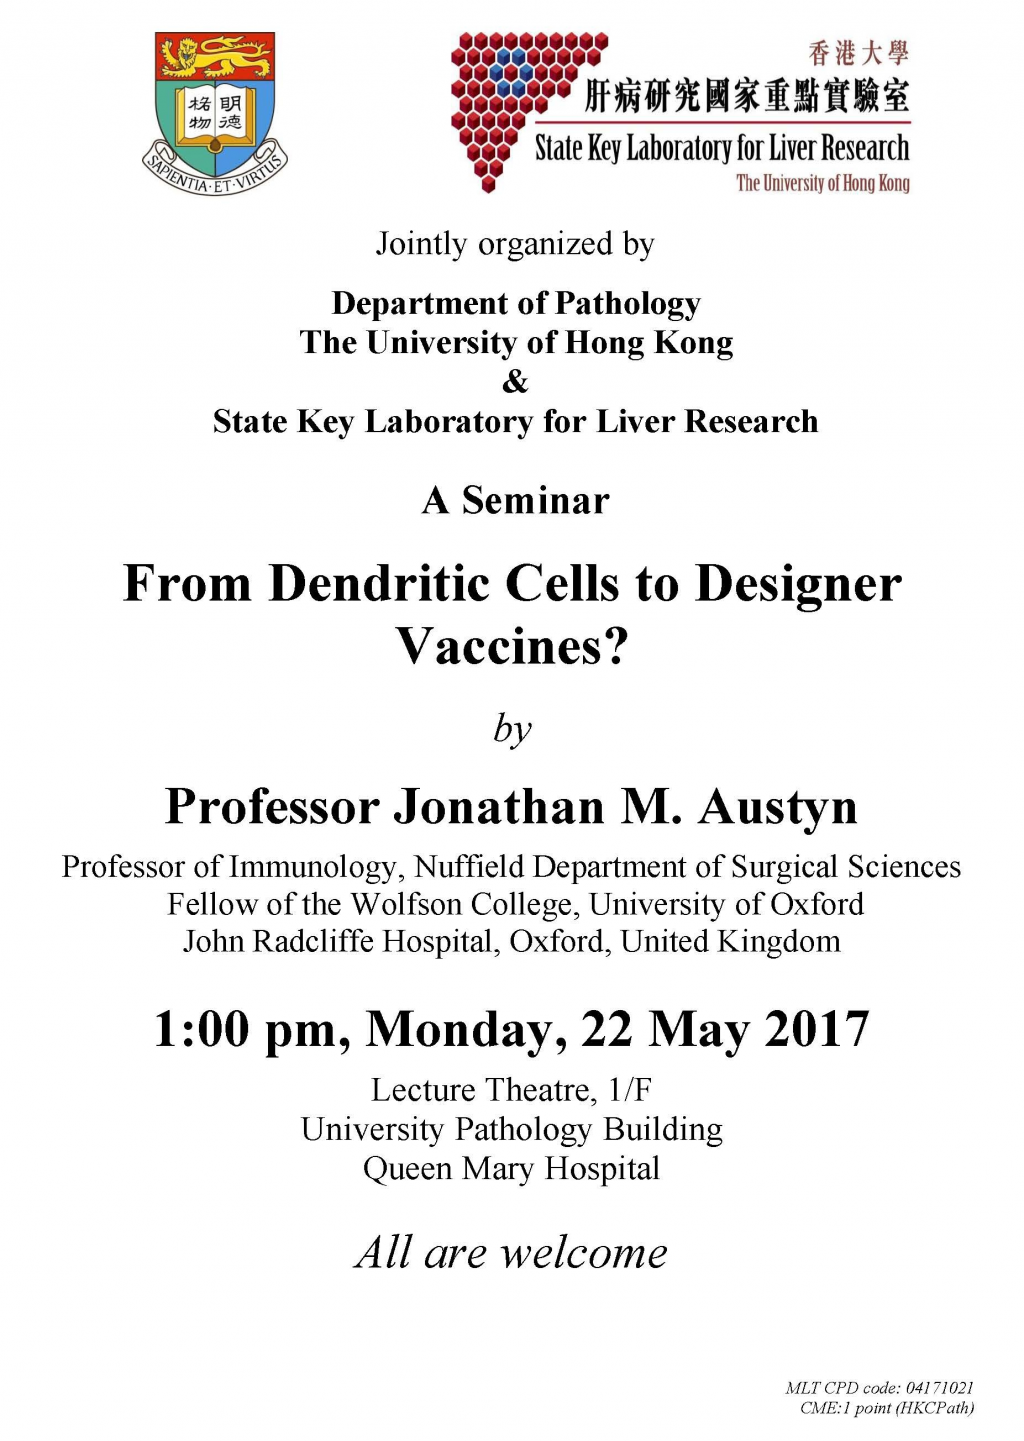 A seminar on From Dendritic Cells to Designer Vaccines? by Professor Jonathan M. Austyn on 22 May (1 pm)